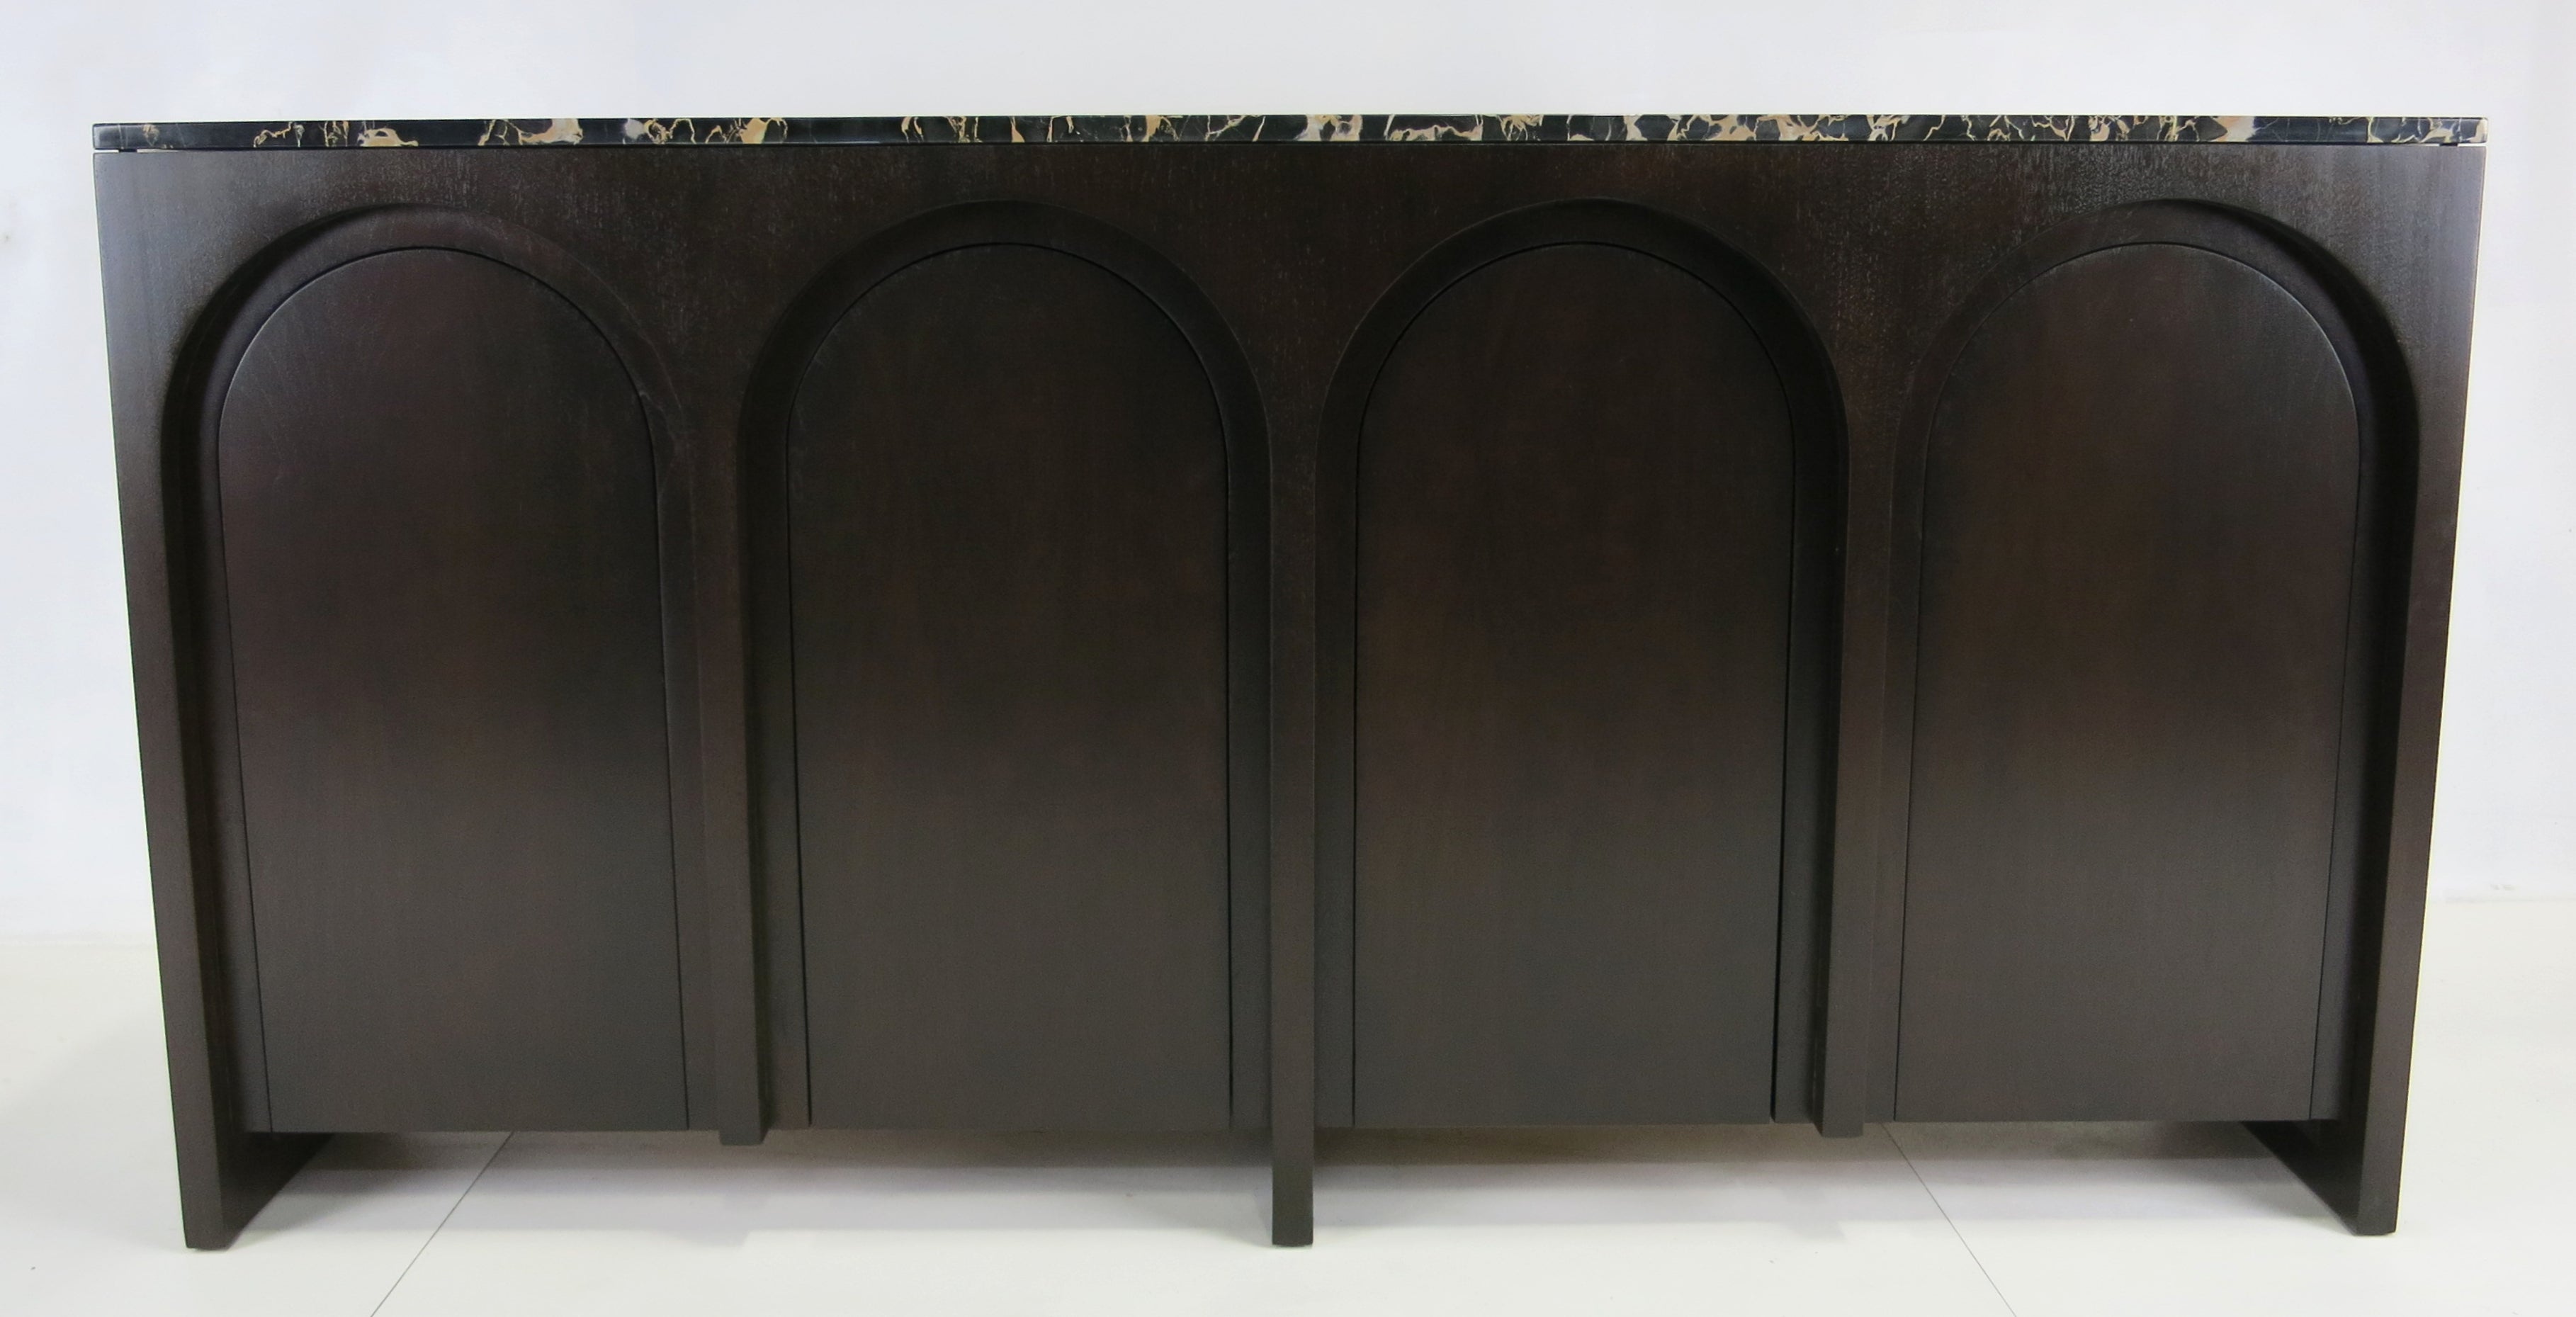 Rare Coliseum Buffet with Marble Top by T.H. Robsjohn-Gibbings